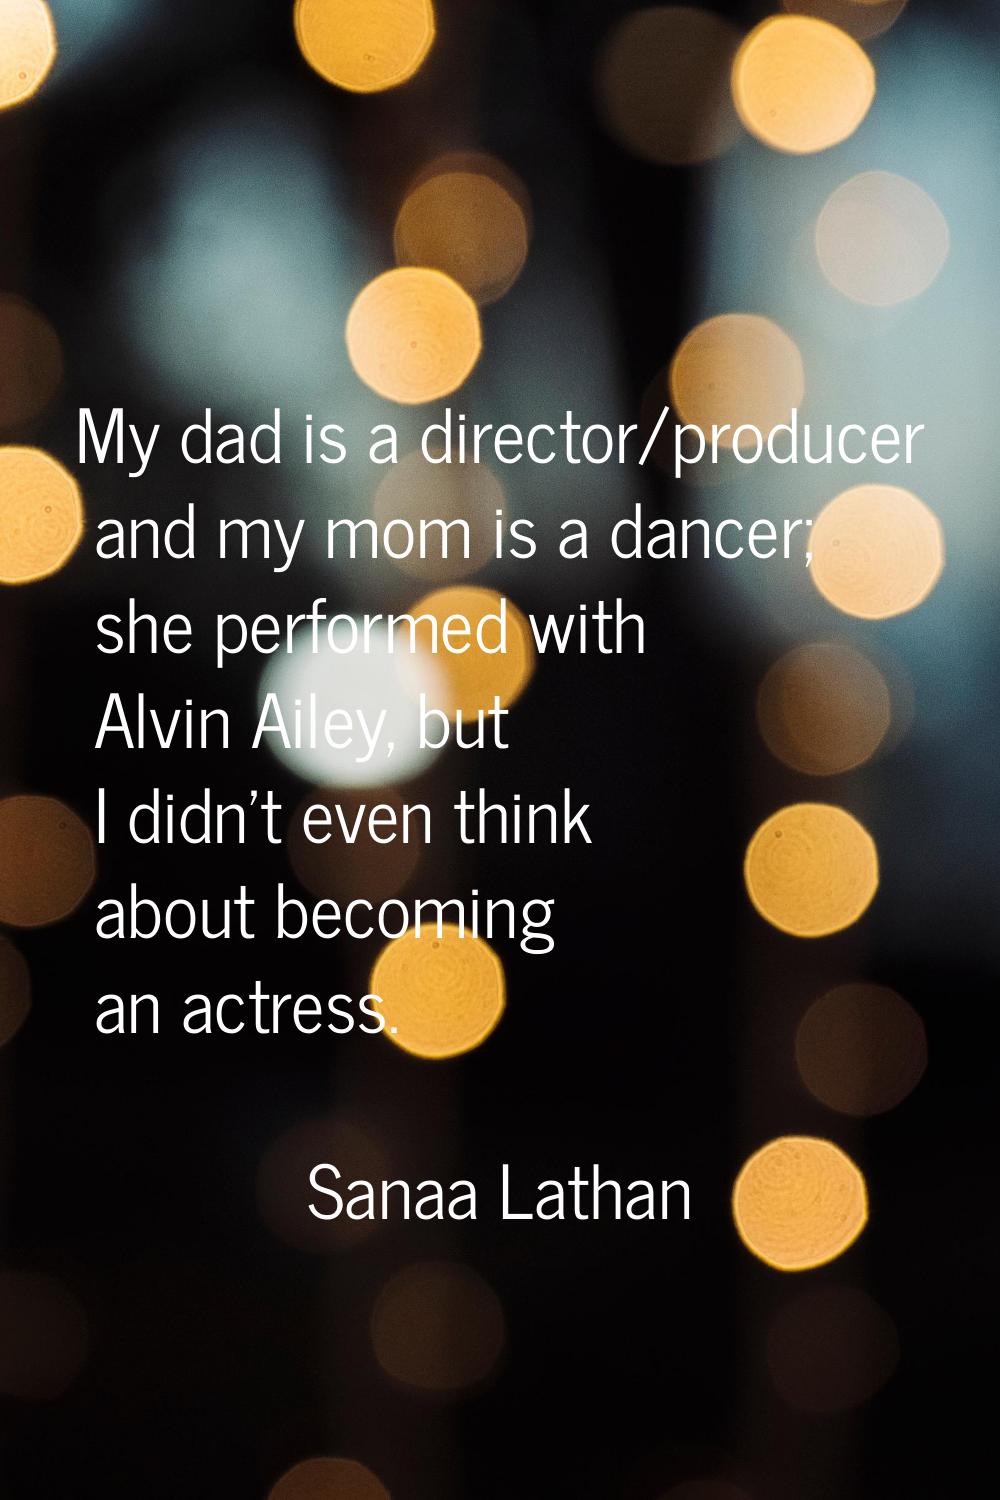 My dad is a director/producer and my mom is a dancer; she performed with Alvin Ailey, but I didn't 